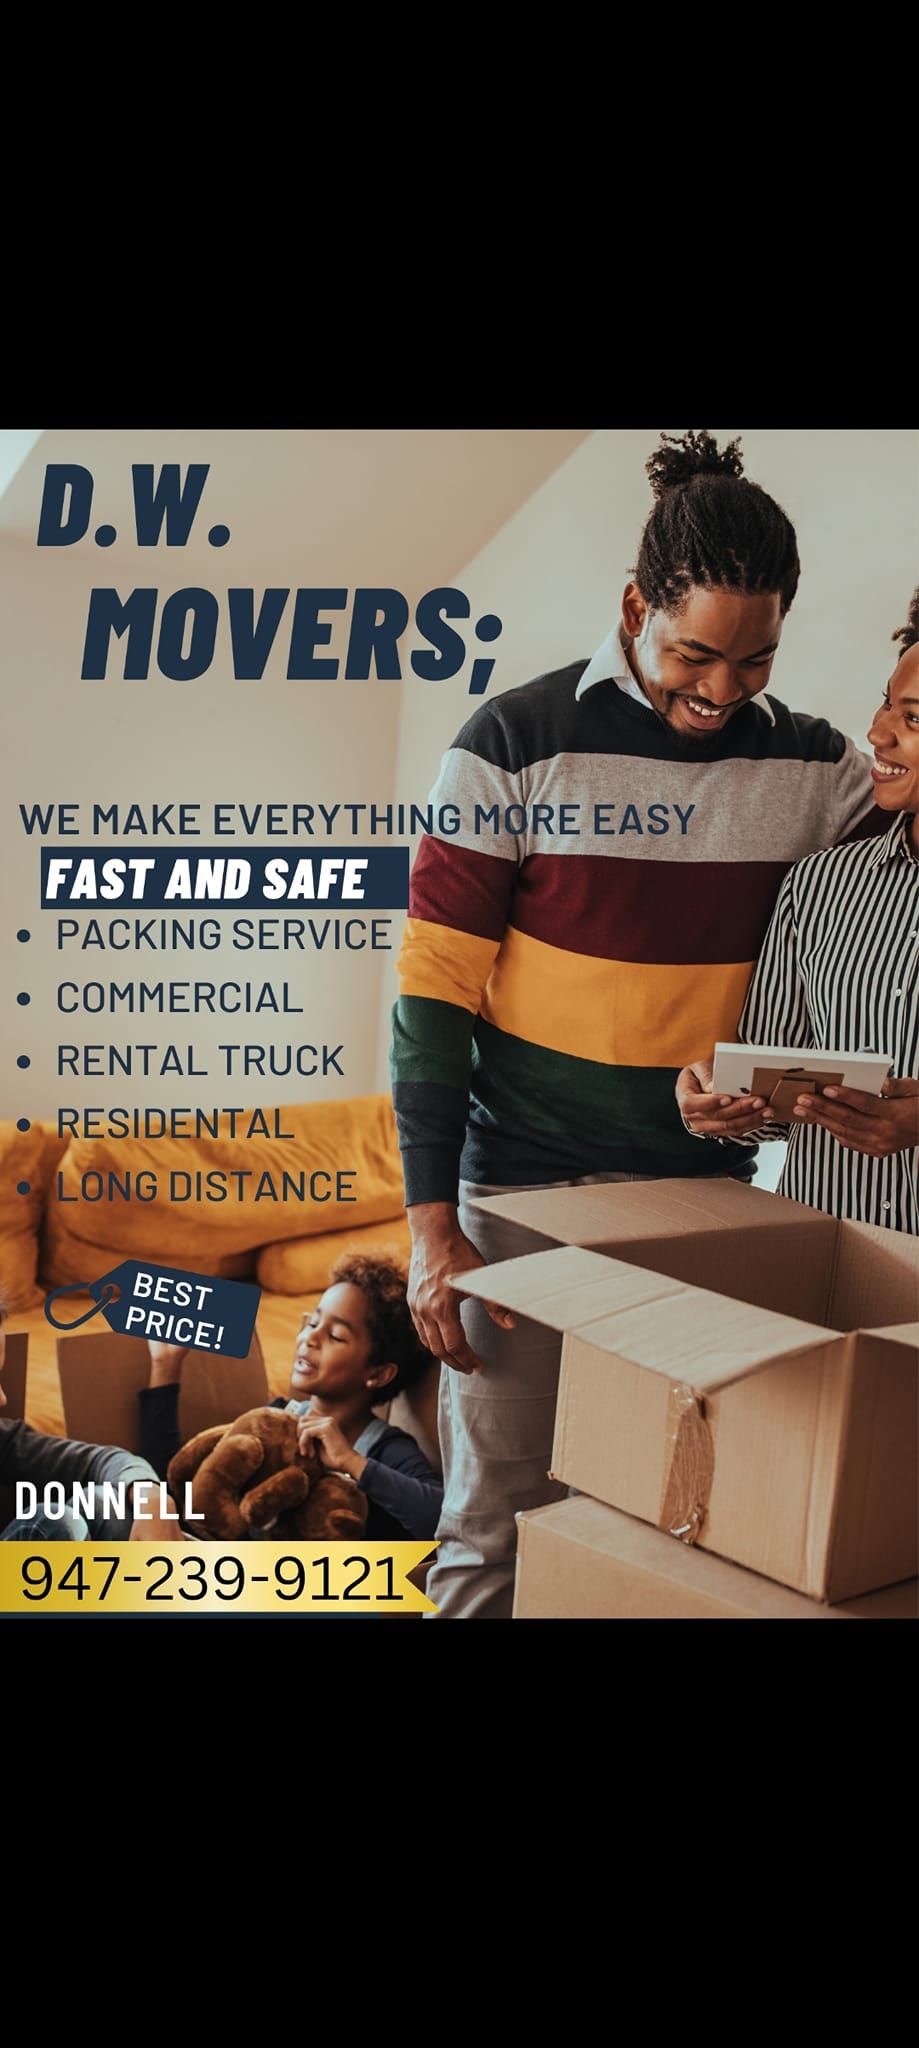 Discounted Moves by D.W. MOVER'S